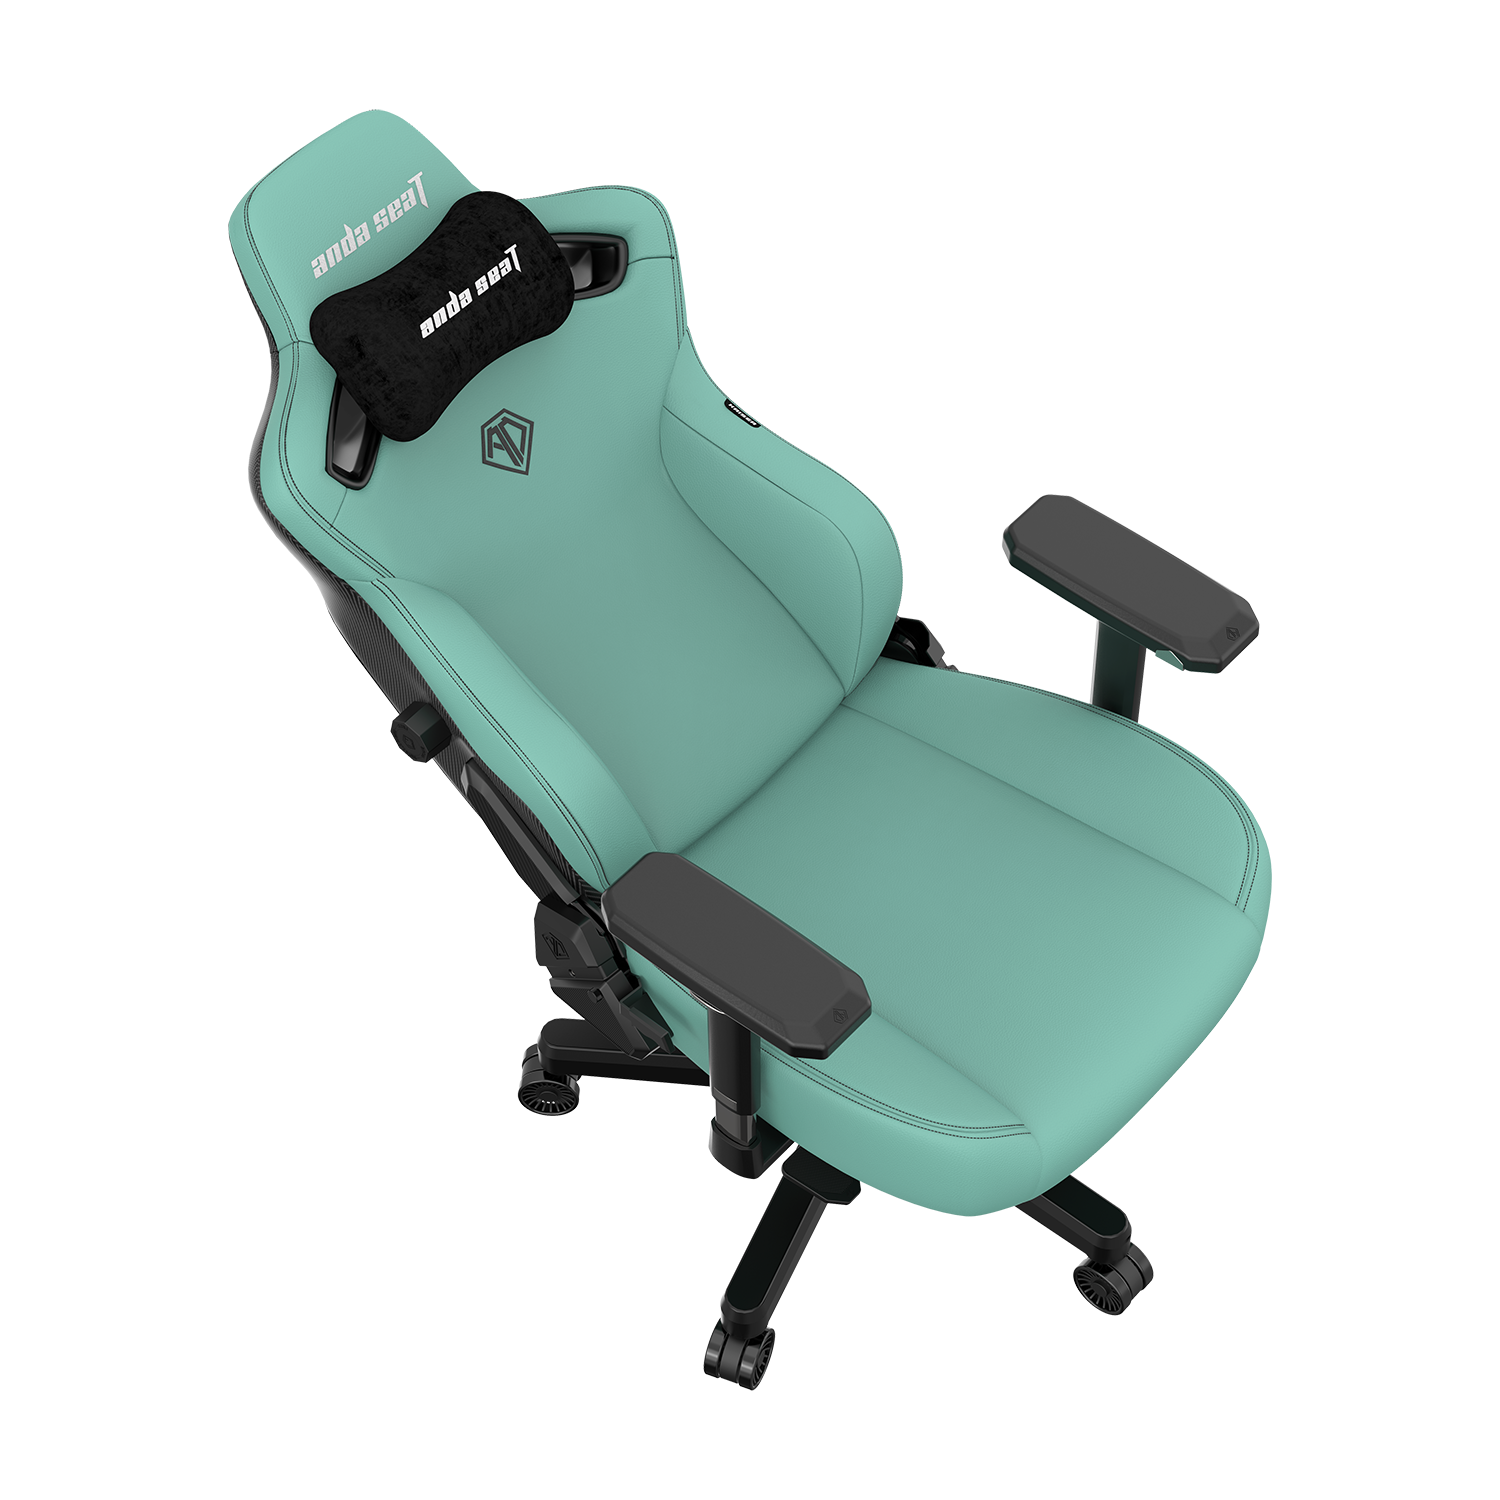 ANDASEAT KAISER 3 L SIZE DURAXTRA LEATHERETTE - ROBIN EGG BLUE